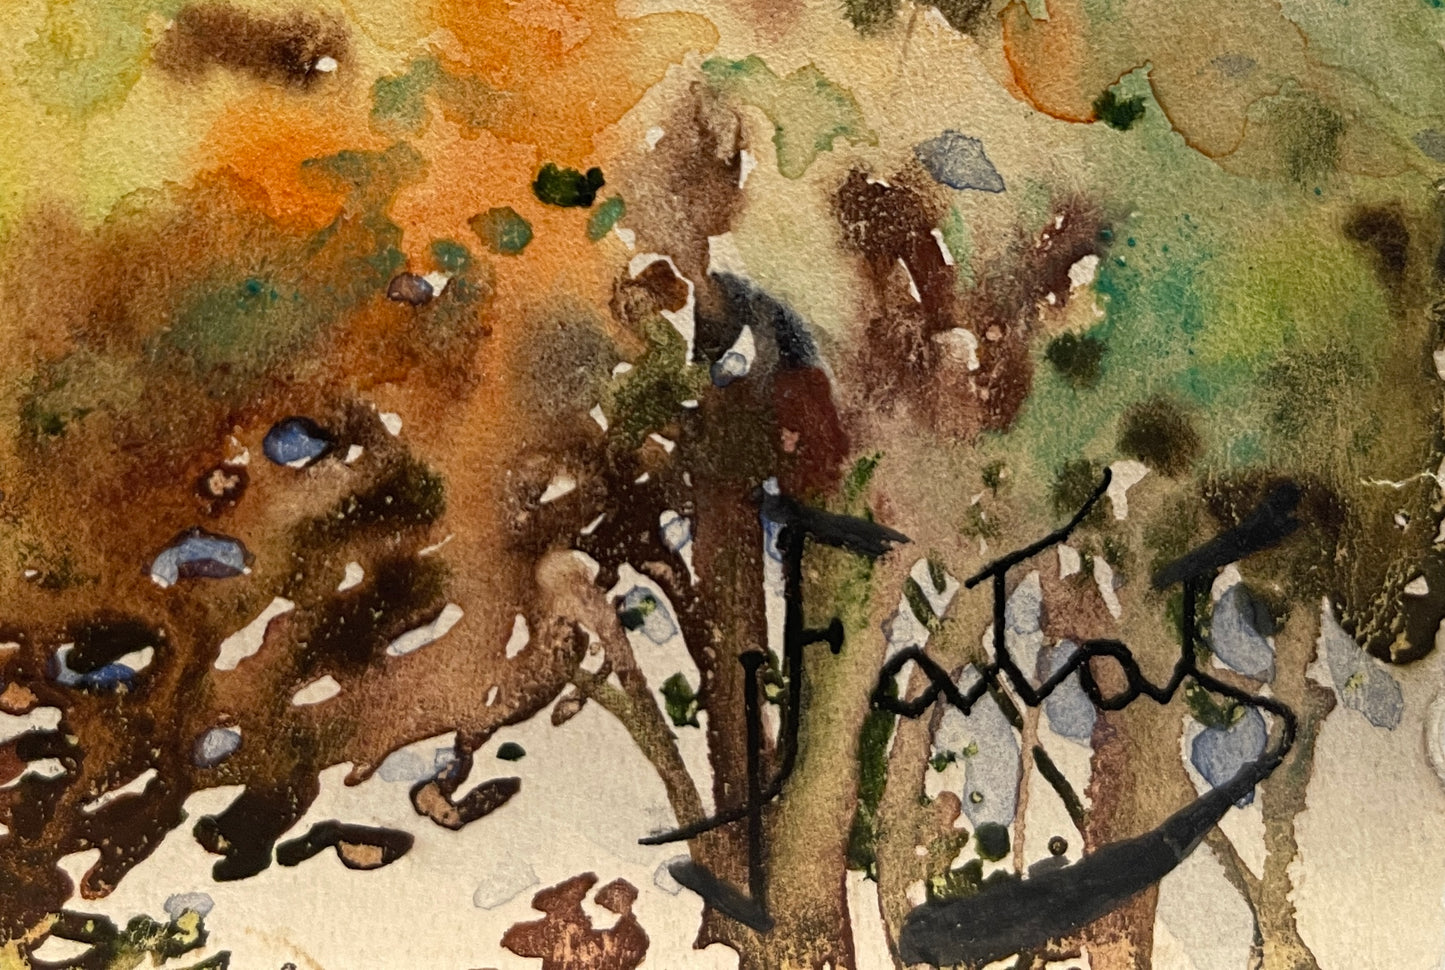 Julian Falat Signed Watercolor: "Autumn Trees and Mountainous background"